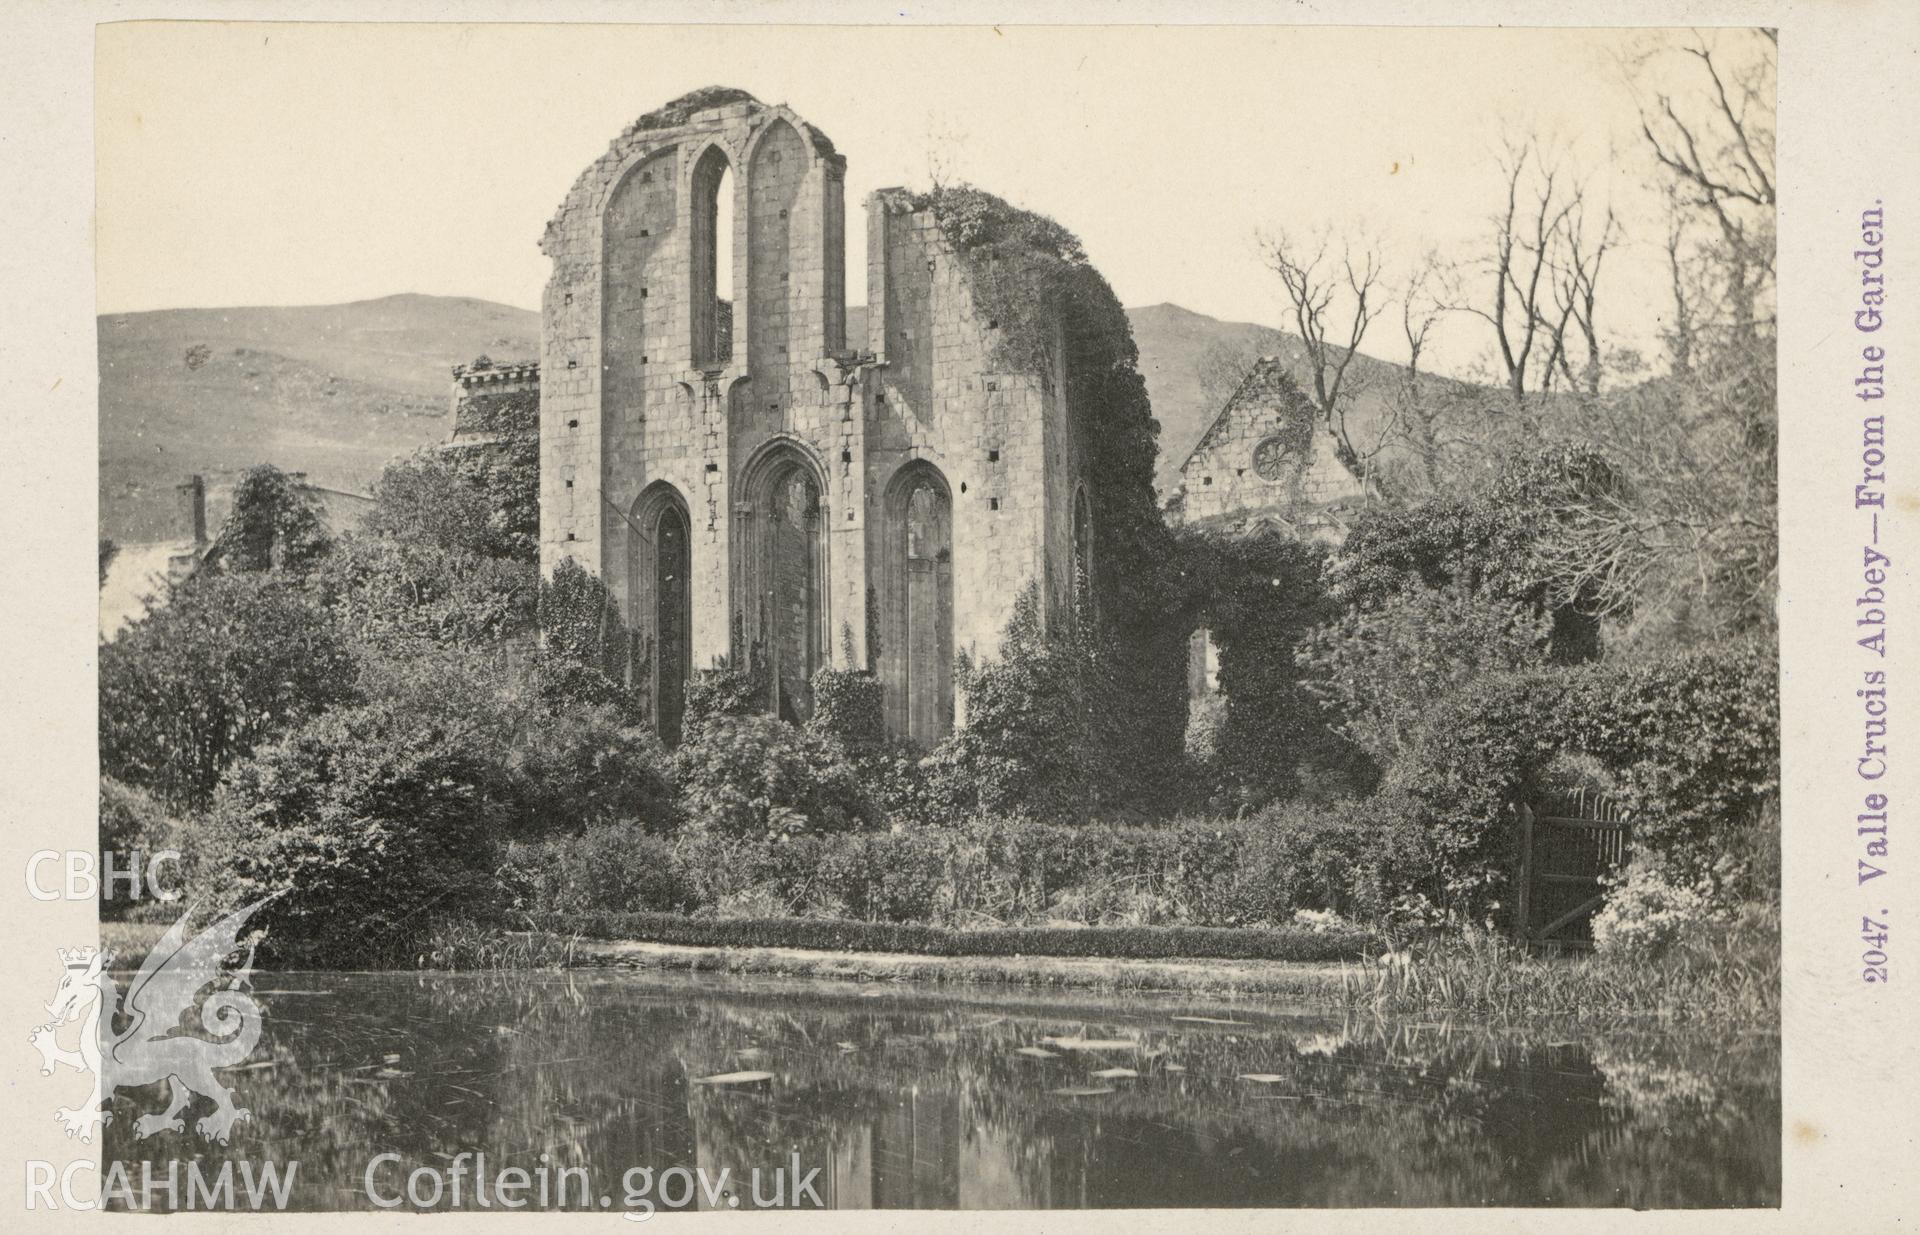 Digital copy of a black and white carte de visite albumen print showing Valle Crucis Abbey, near Llangollen produced by F. Bedford.